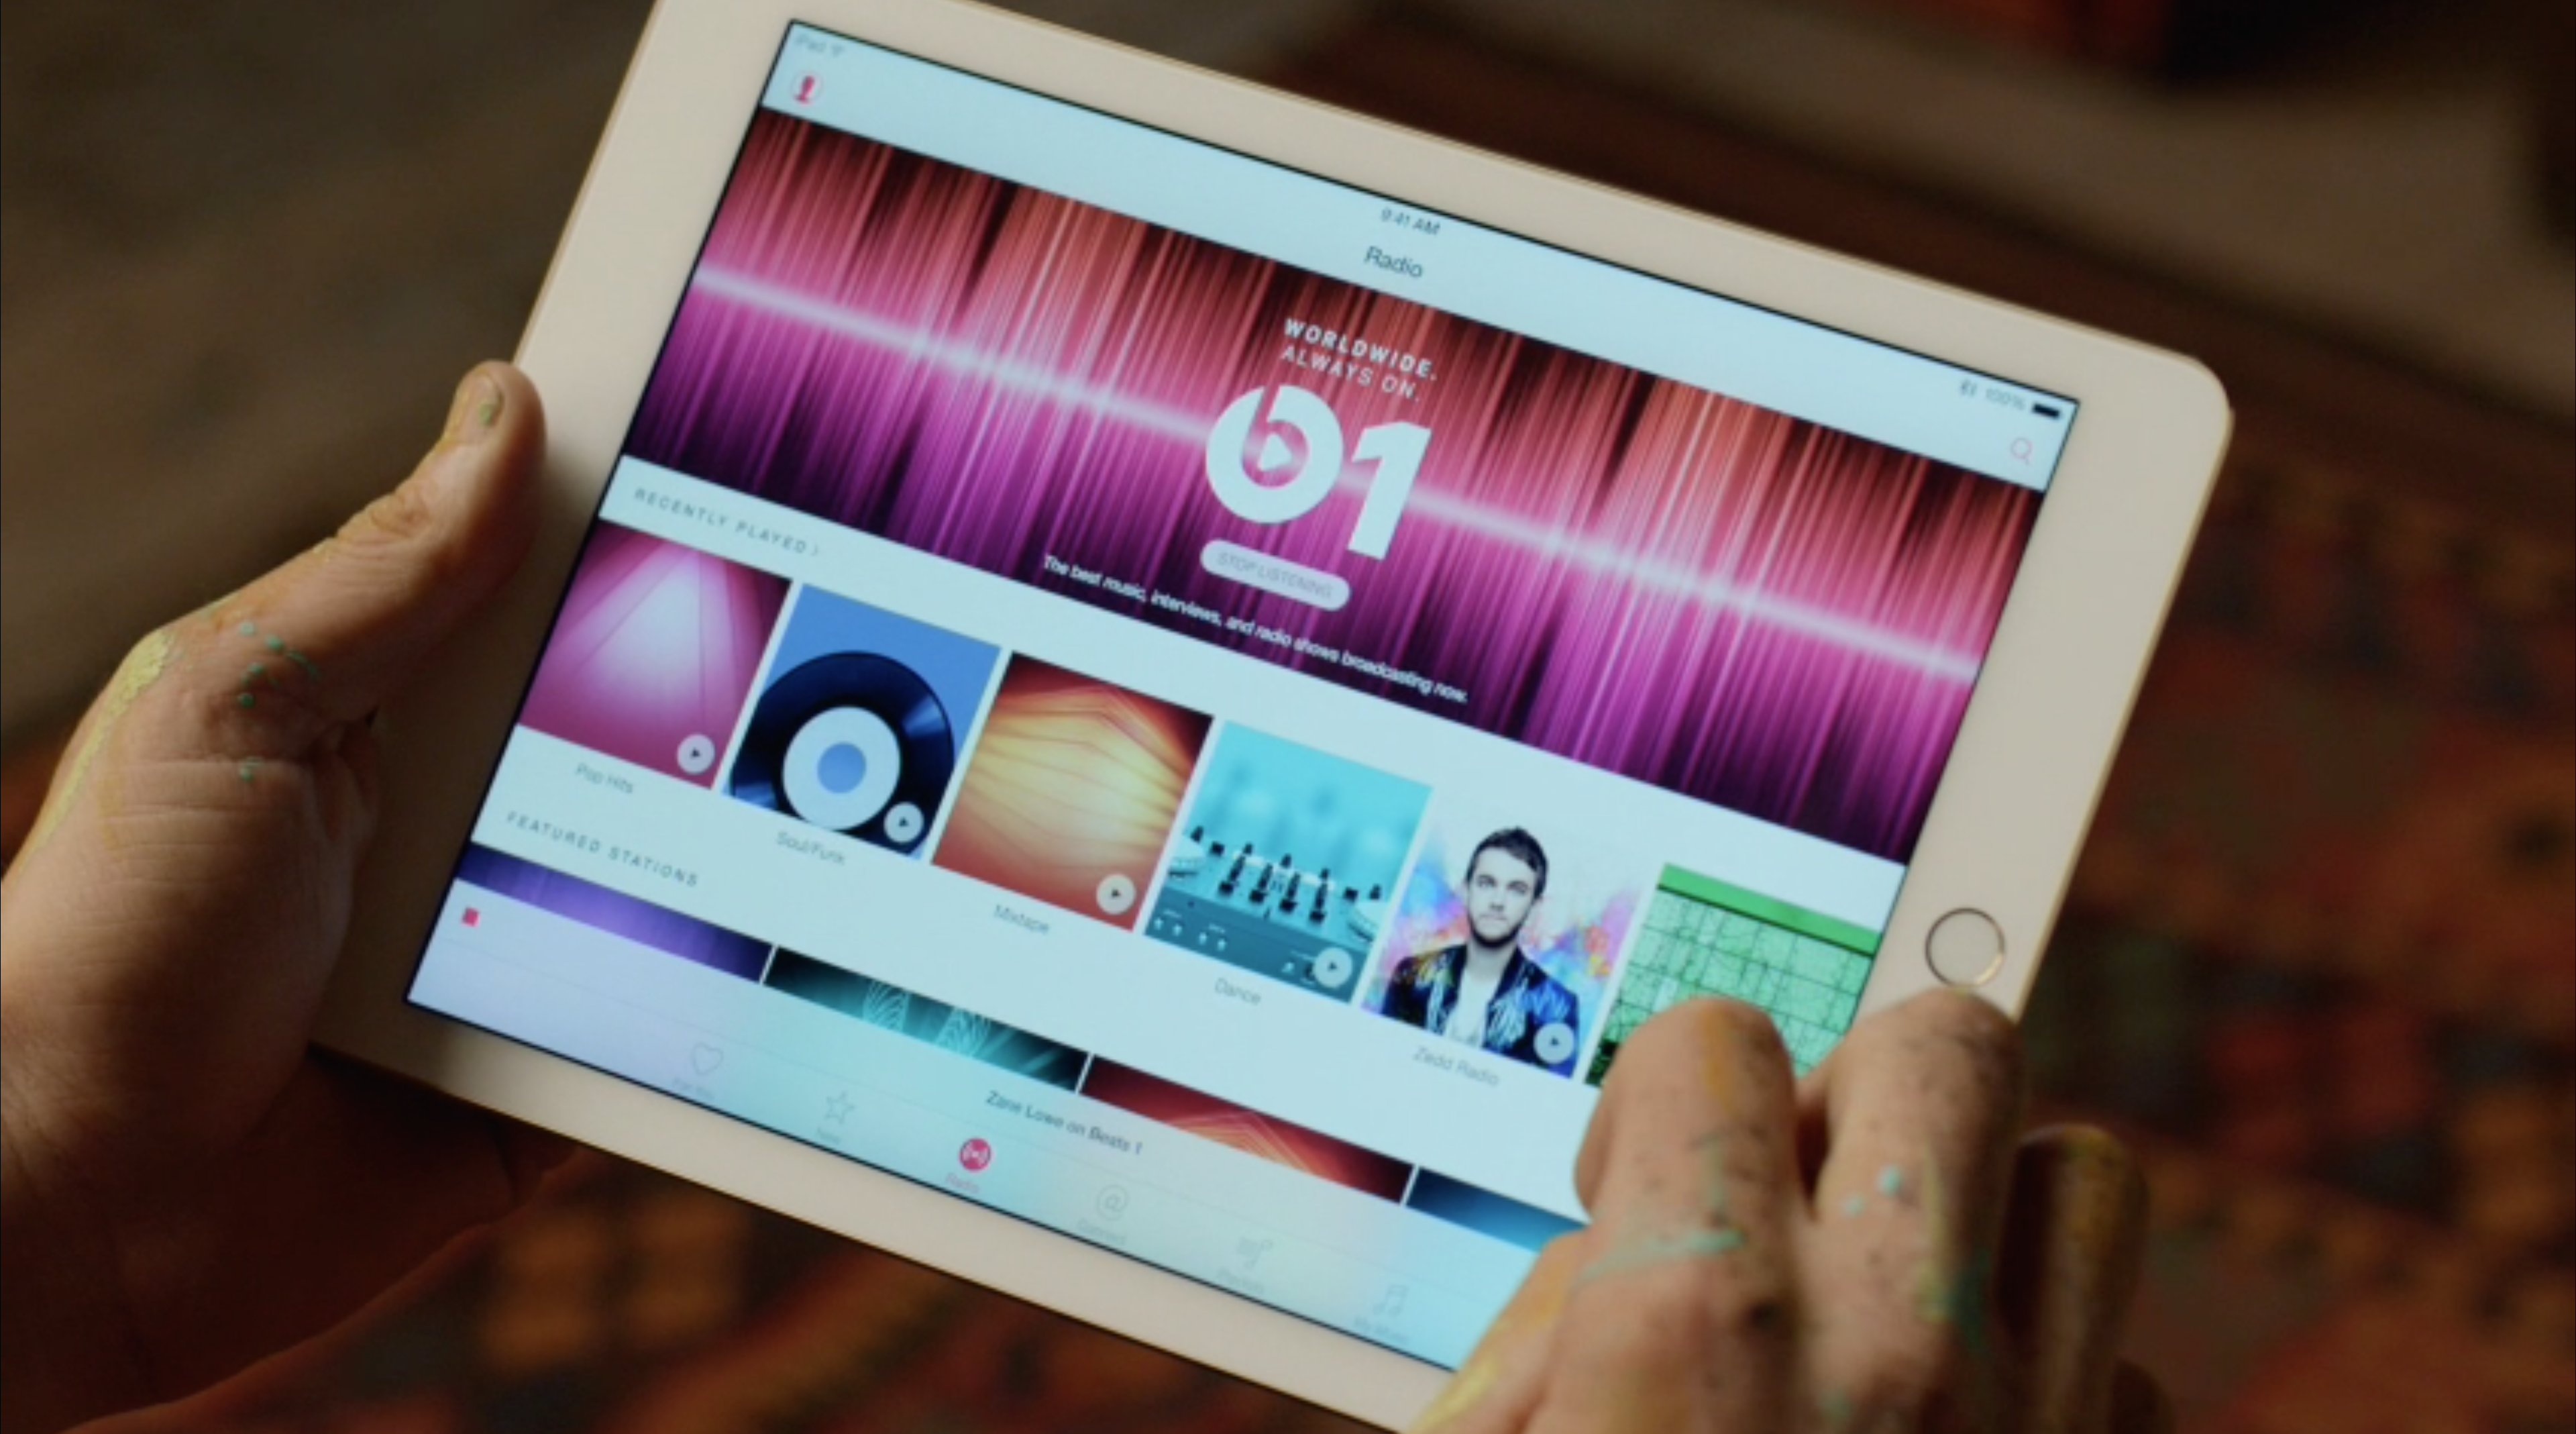 Apple Music's target persona permanently has paint-spattered hands.